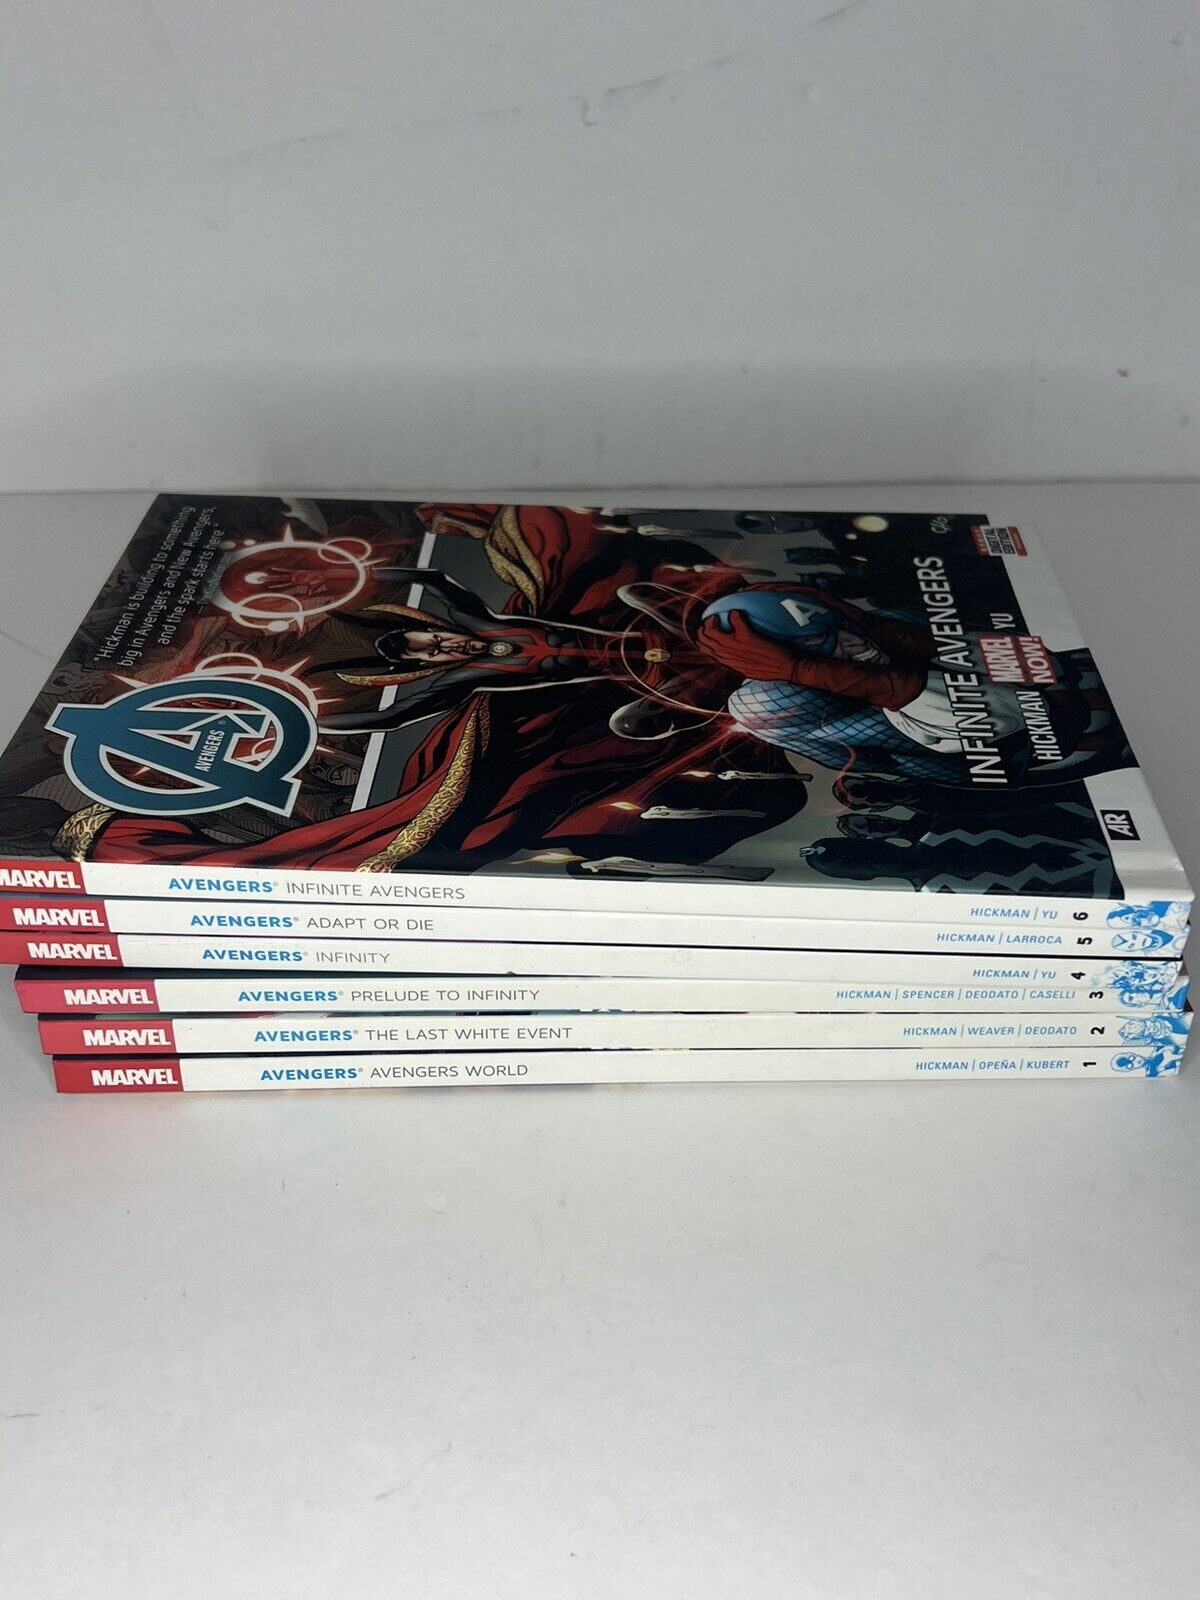 AVENGERS BY HICKMAN VOL 1 2 3 4 5 6 ~~ MARVEL HARDCOVER * 6 BOOK LOT